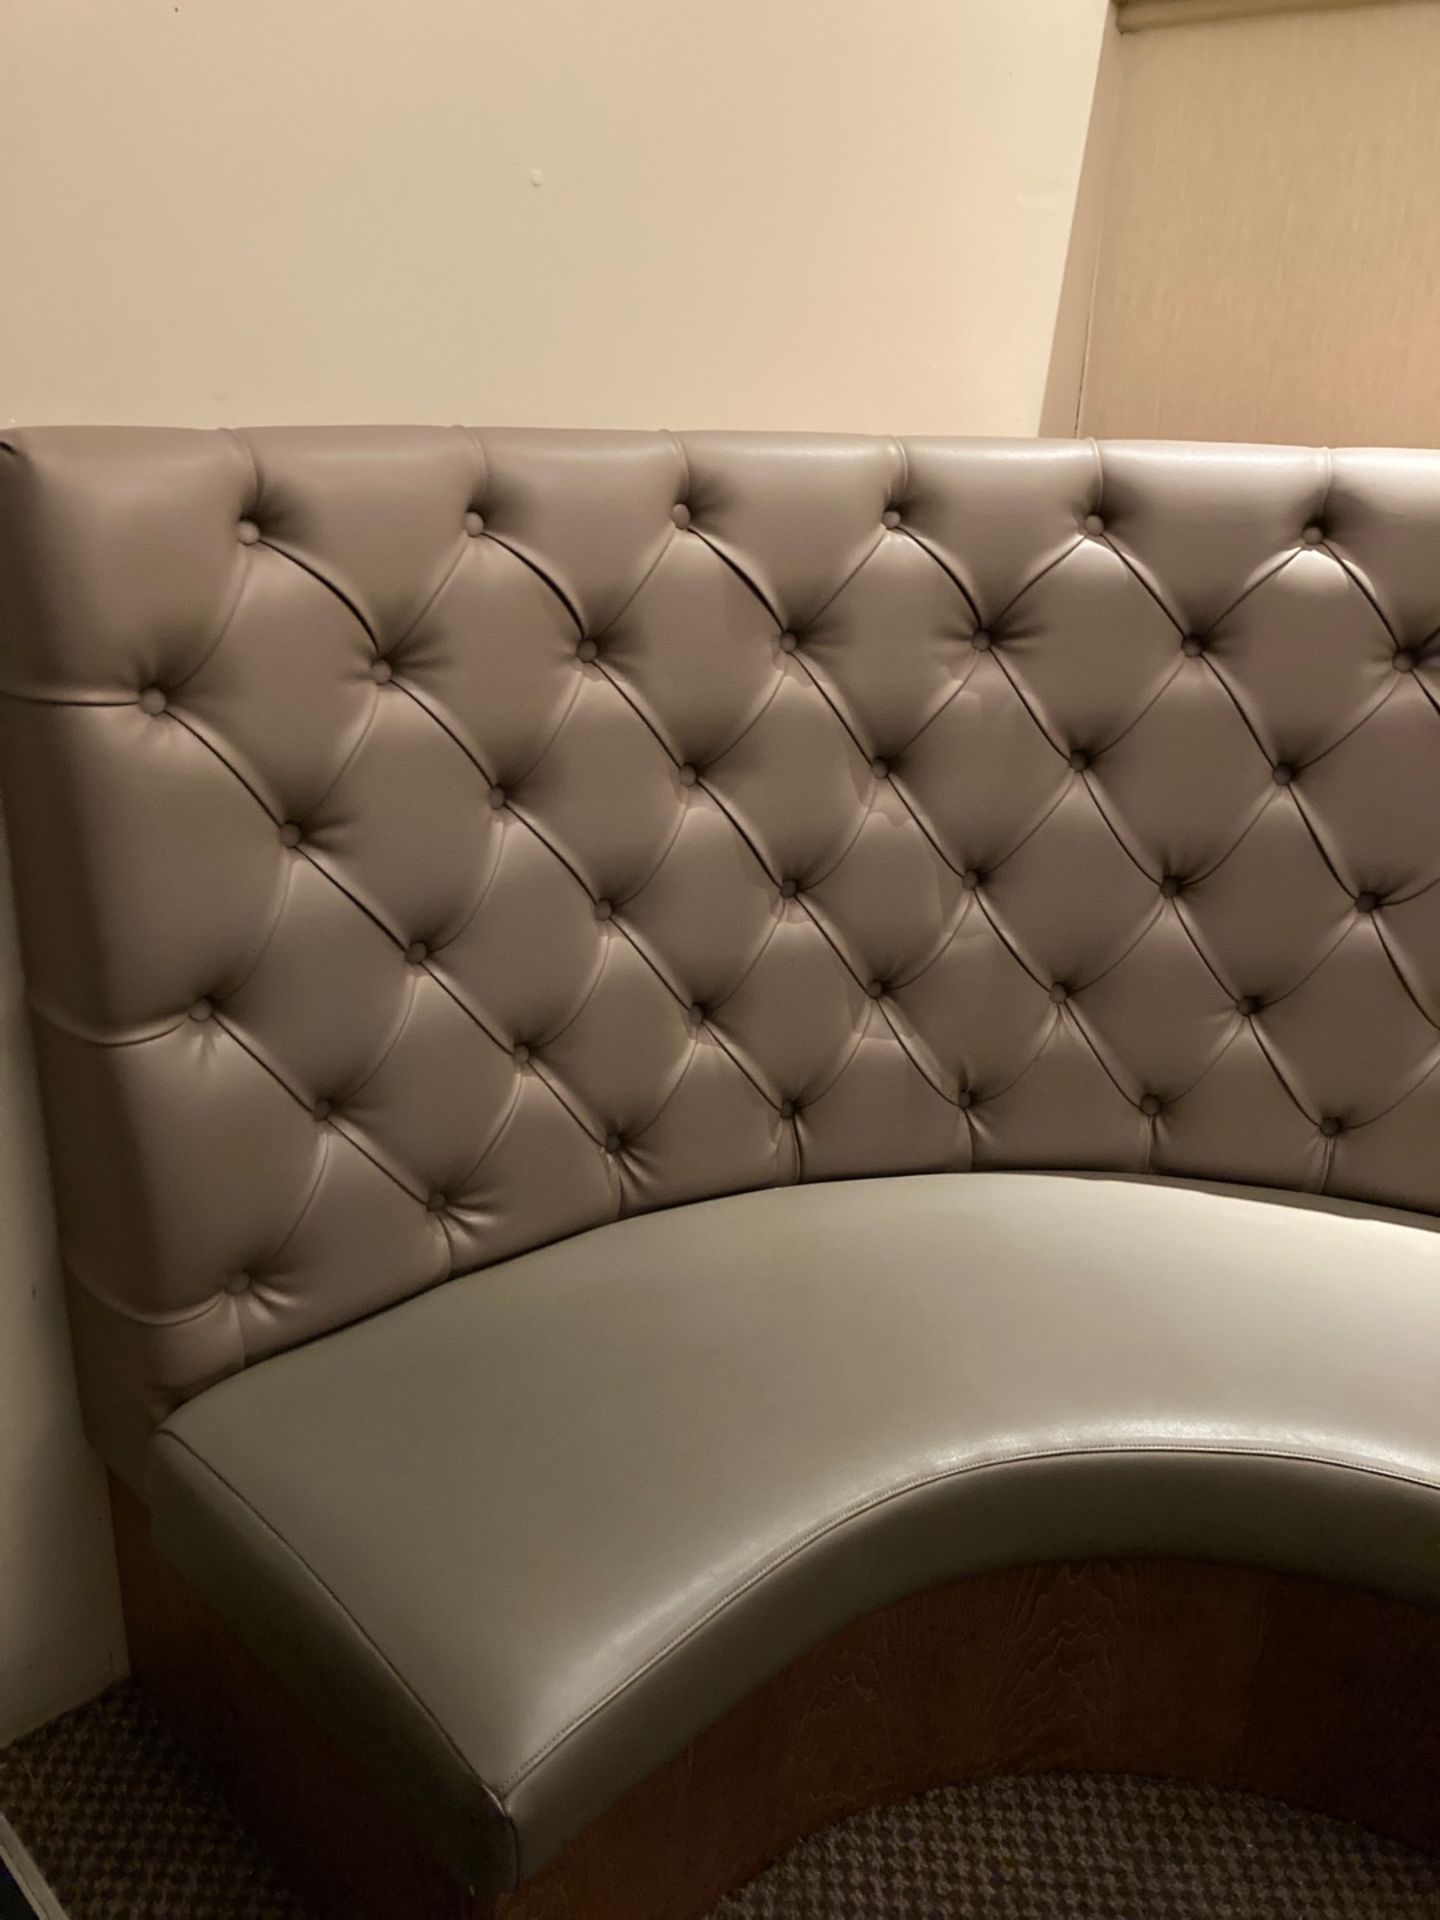 Banquette Seating - Image 2 of 4